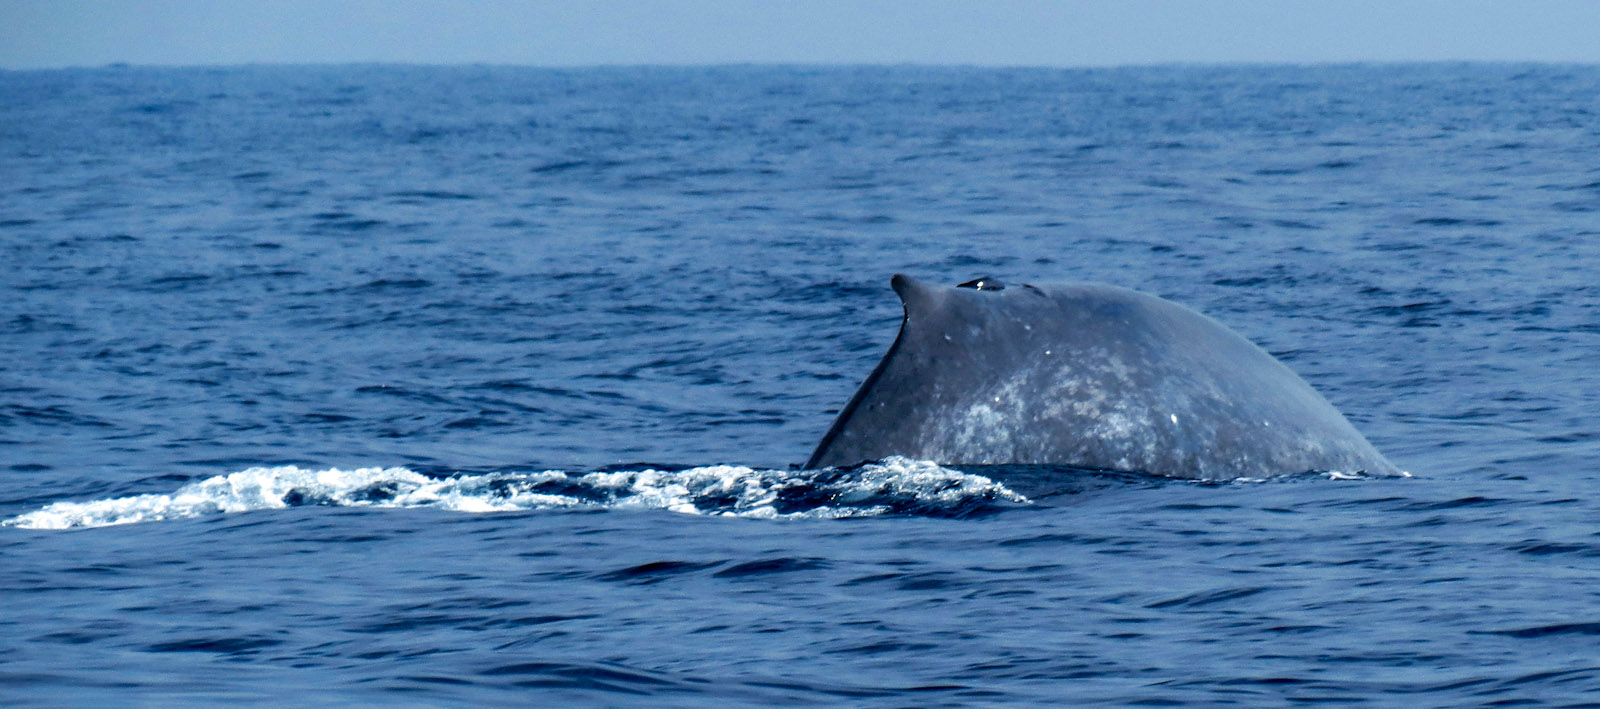 mirissa-whale-with-tail-abut-to-dive